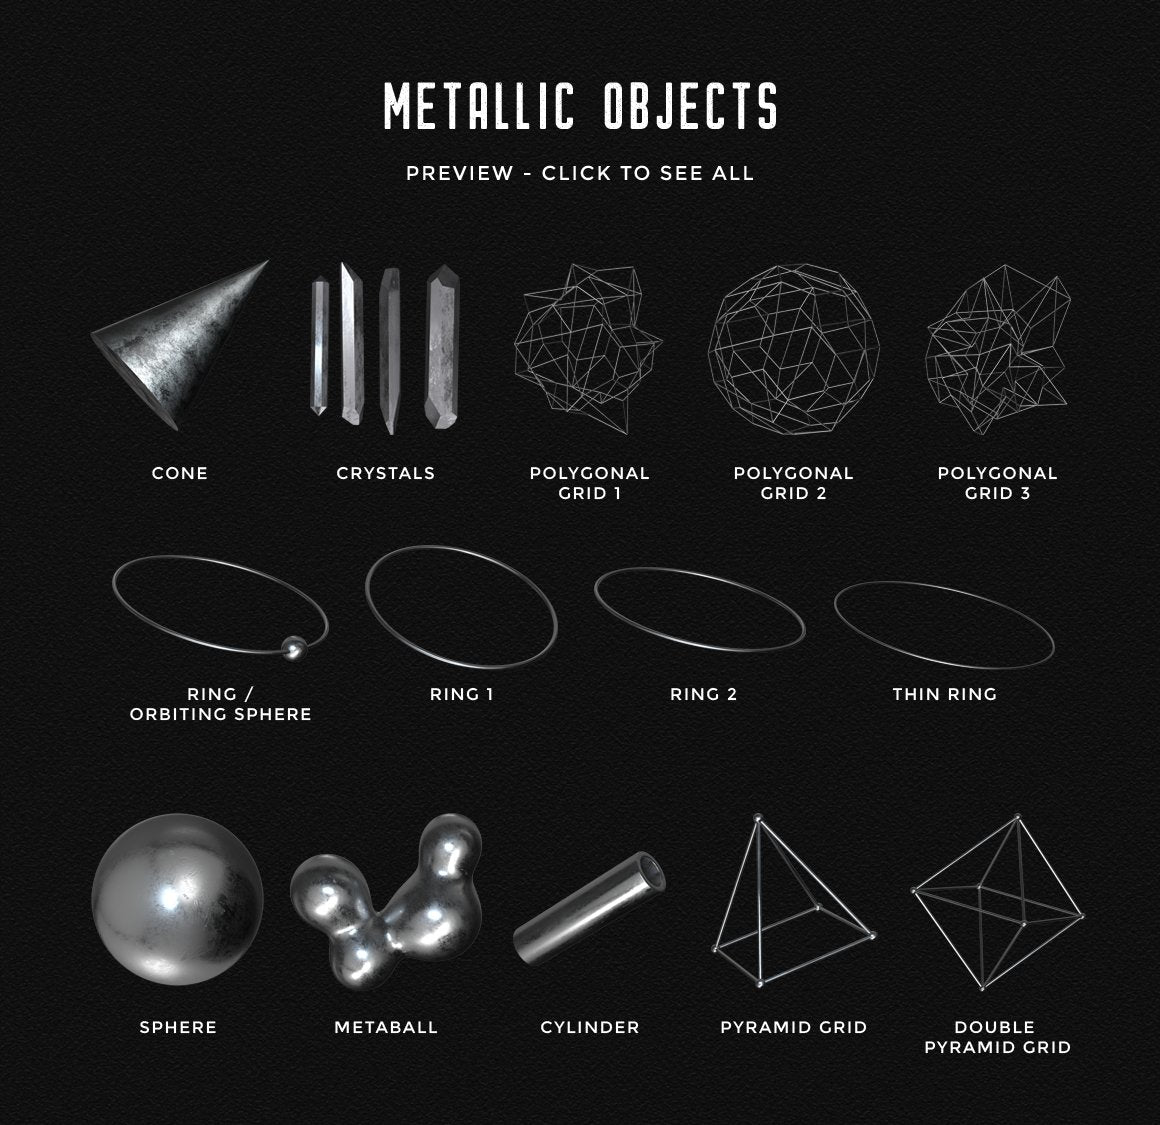 Crystal Spheres + Other Elements